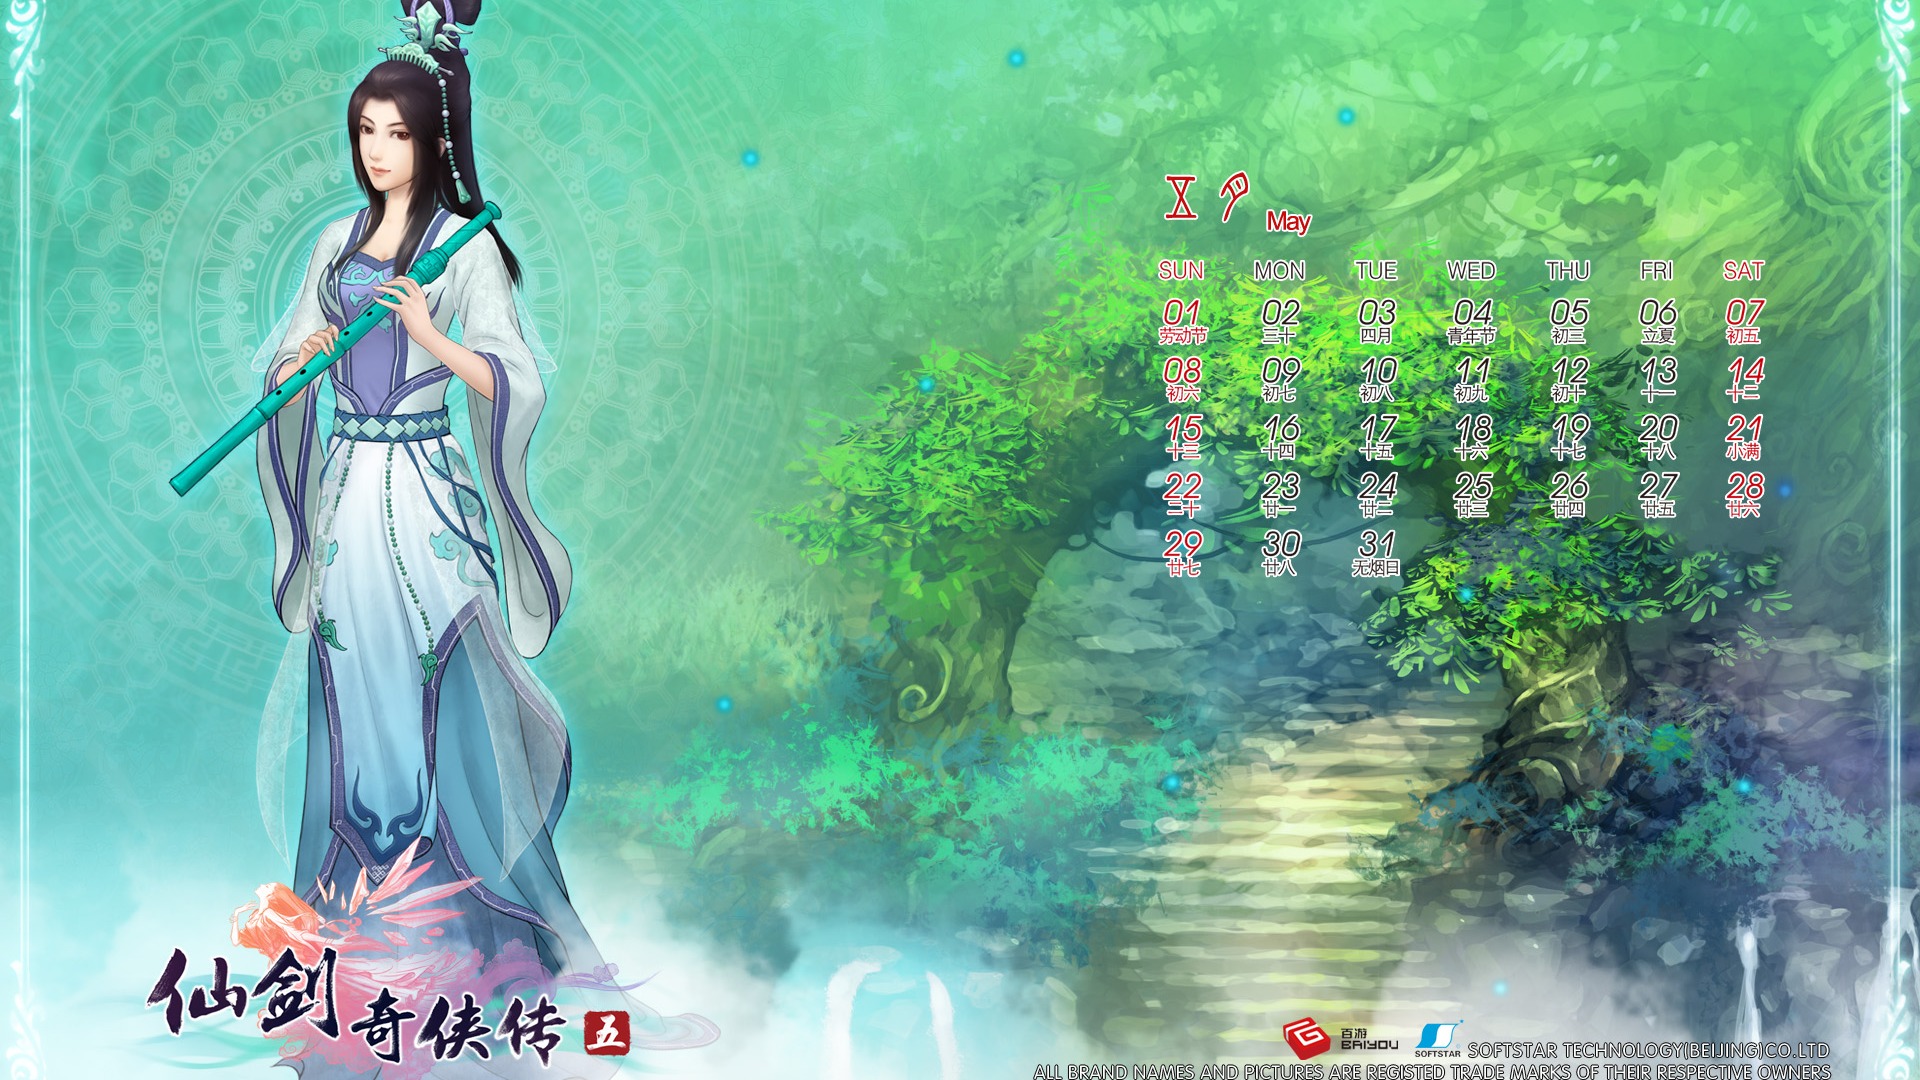 Chinese Paladin 5 wallpapers #9 - 1920x1080